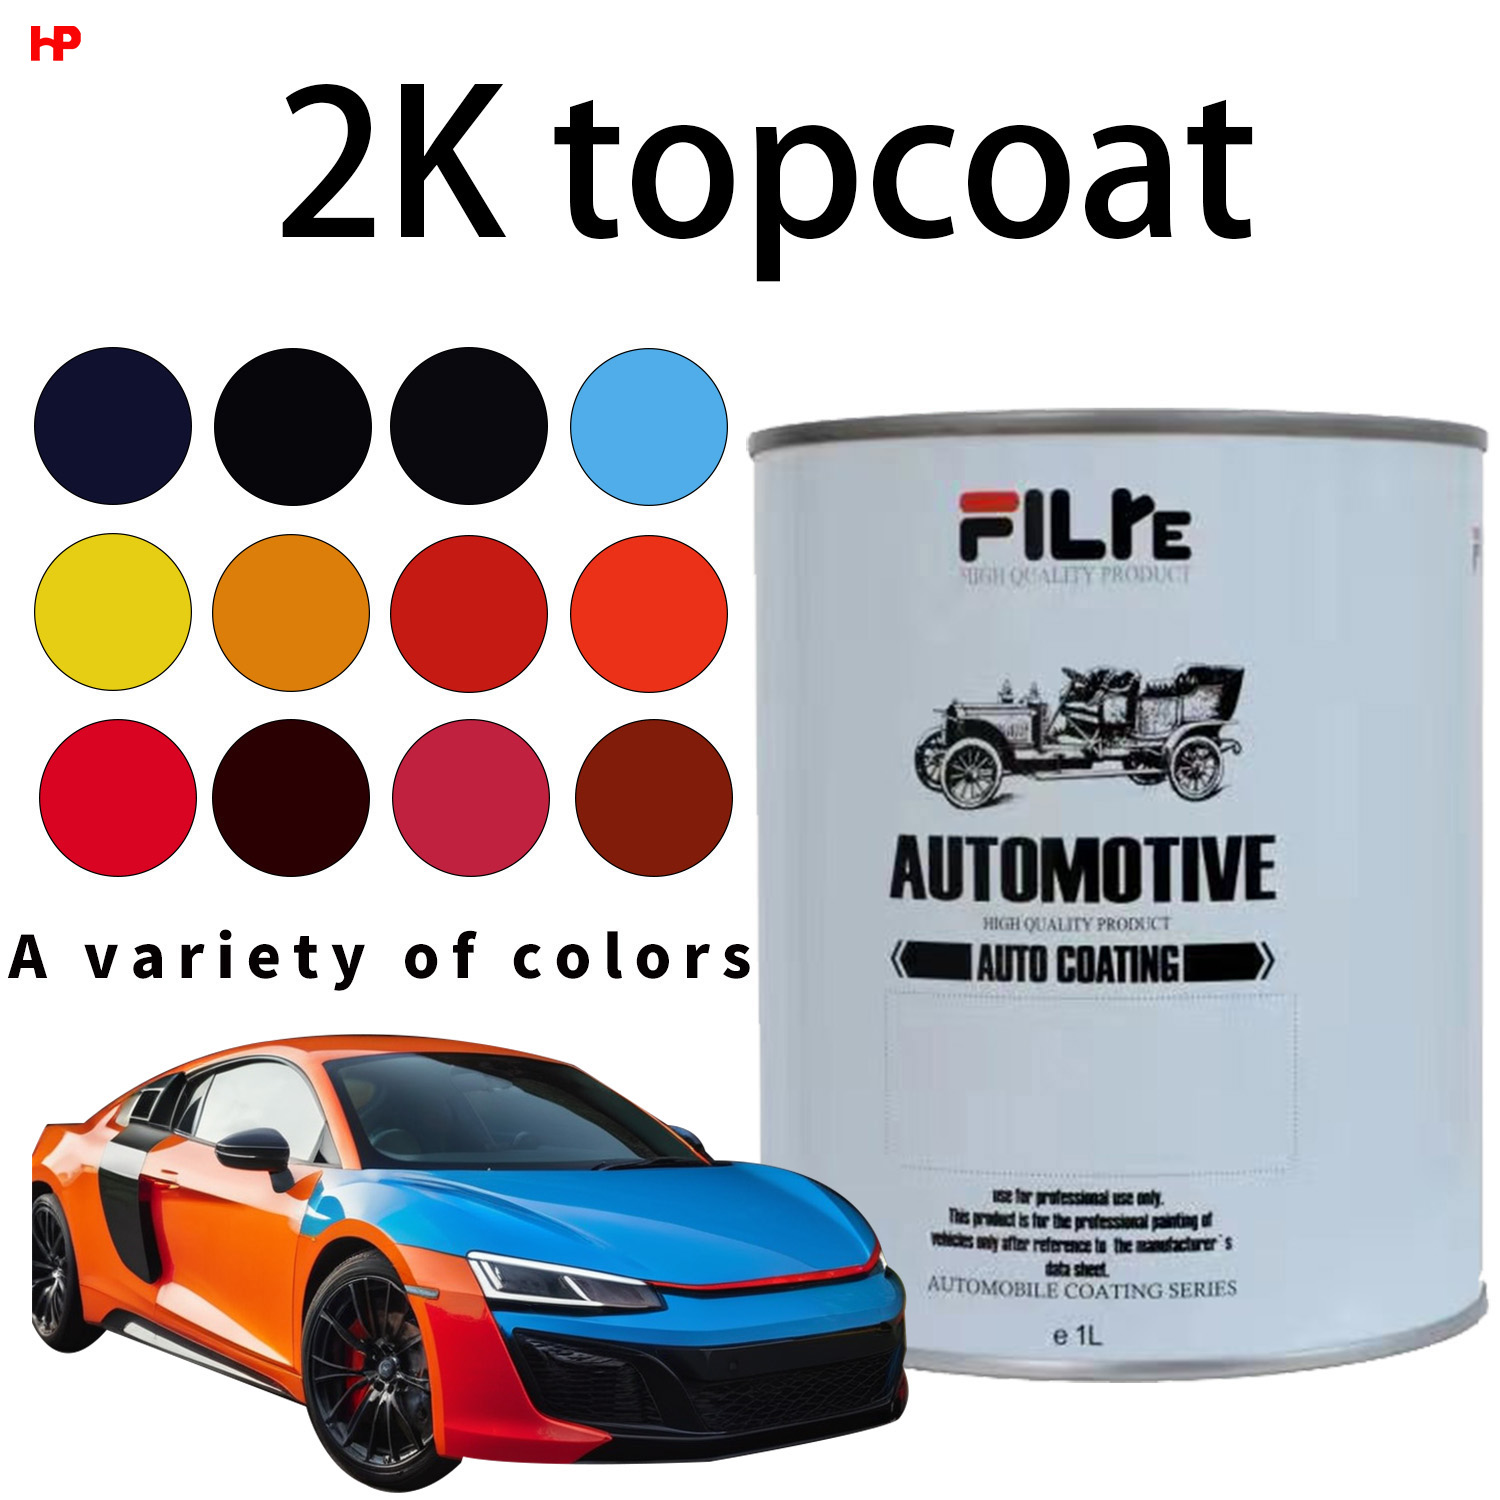 Hengpu 2K Topcoat, Professional Manufactured Car Paints With Good Coverage Good Color, Acrylic High Chroma High Saturation Auto Paints